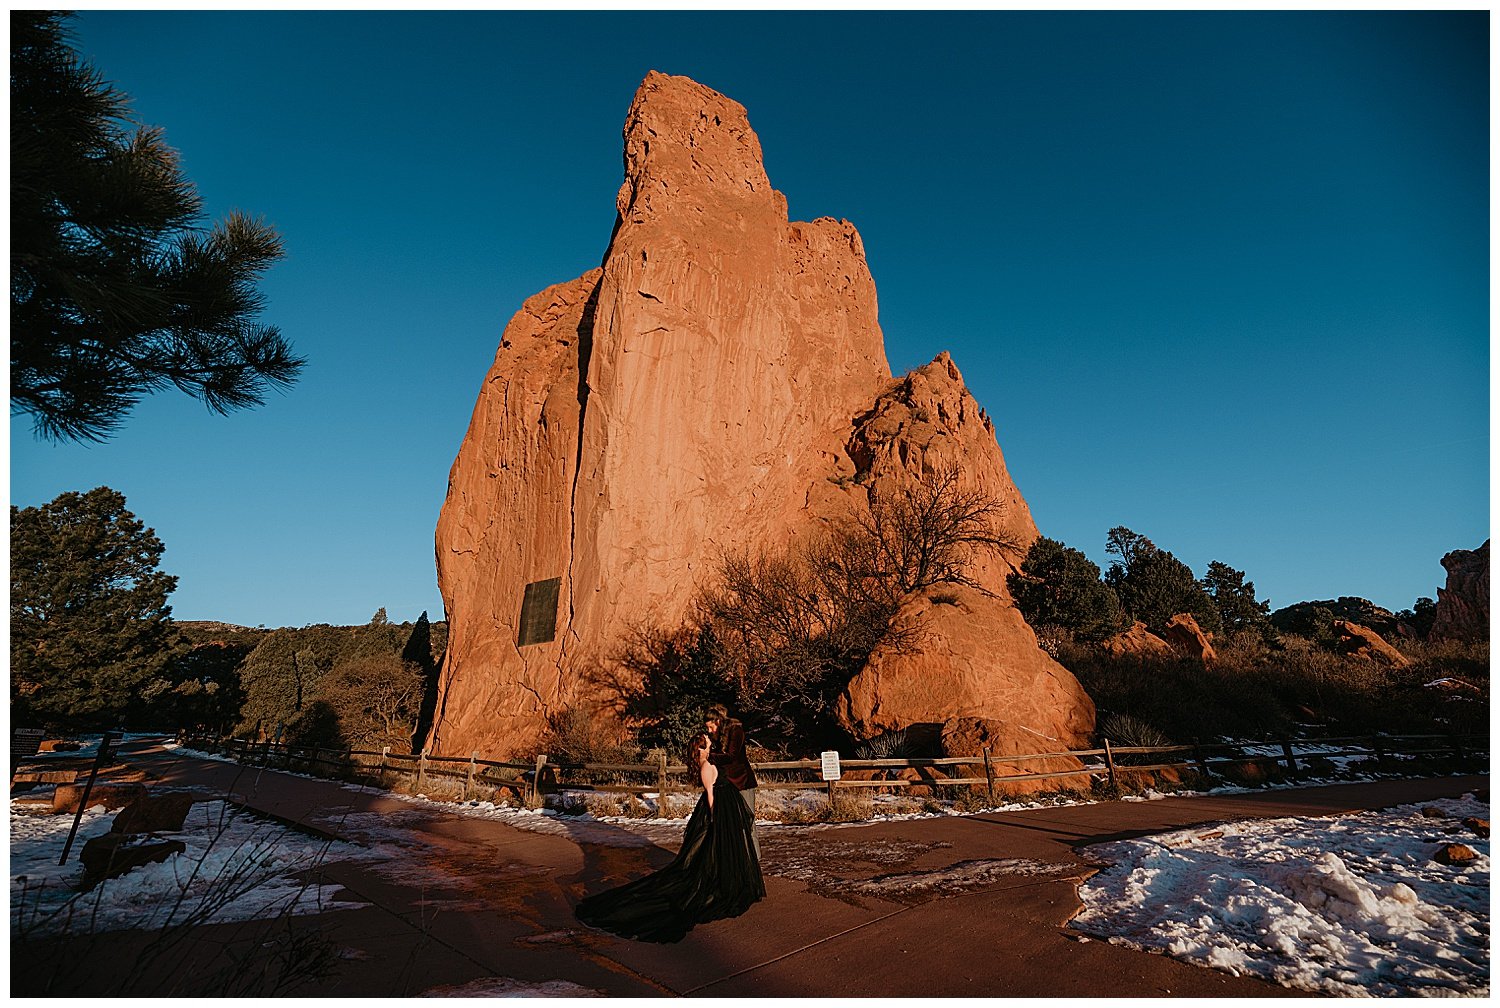 engagement-session-at-garden-of-the-gods-colorado-springs-co_0010.jpg